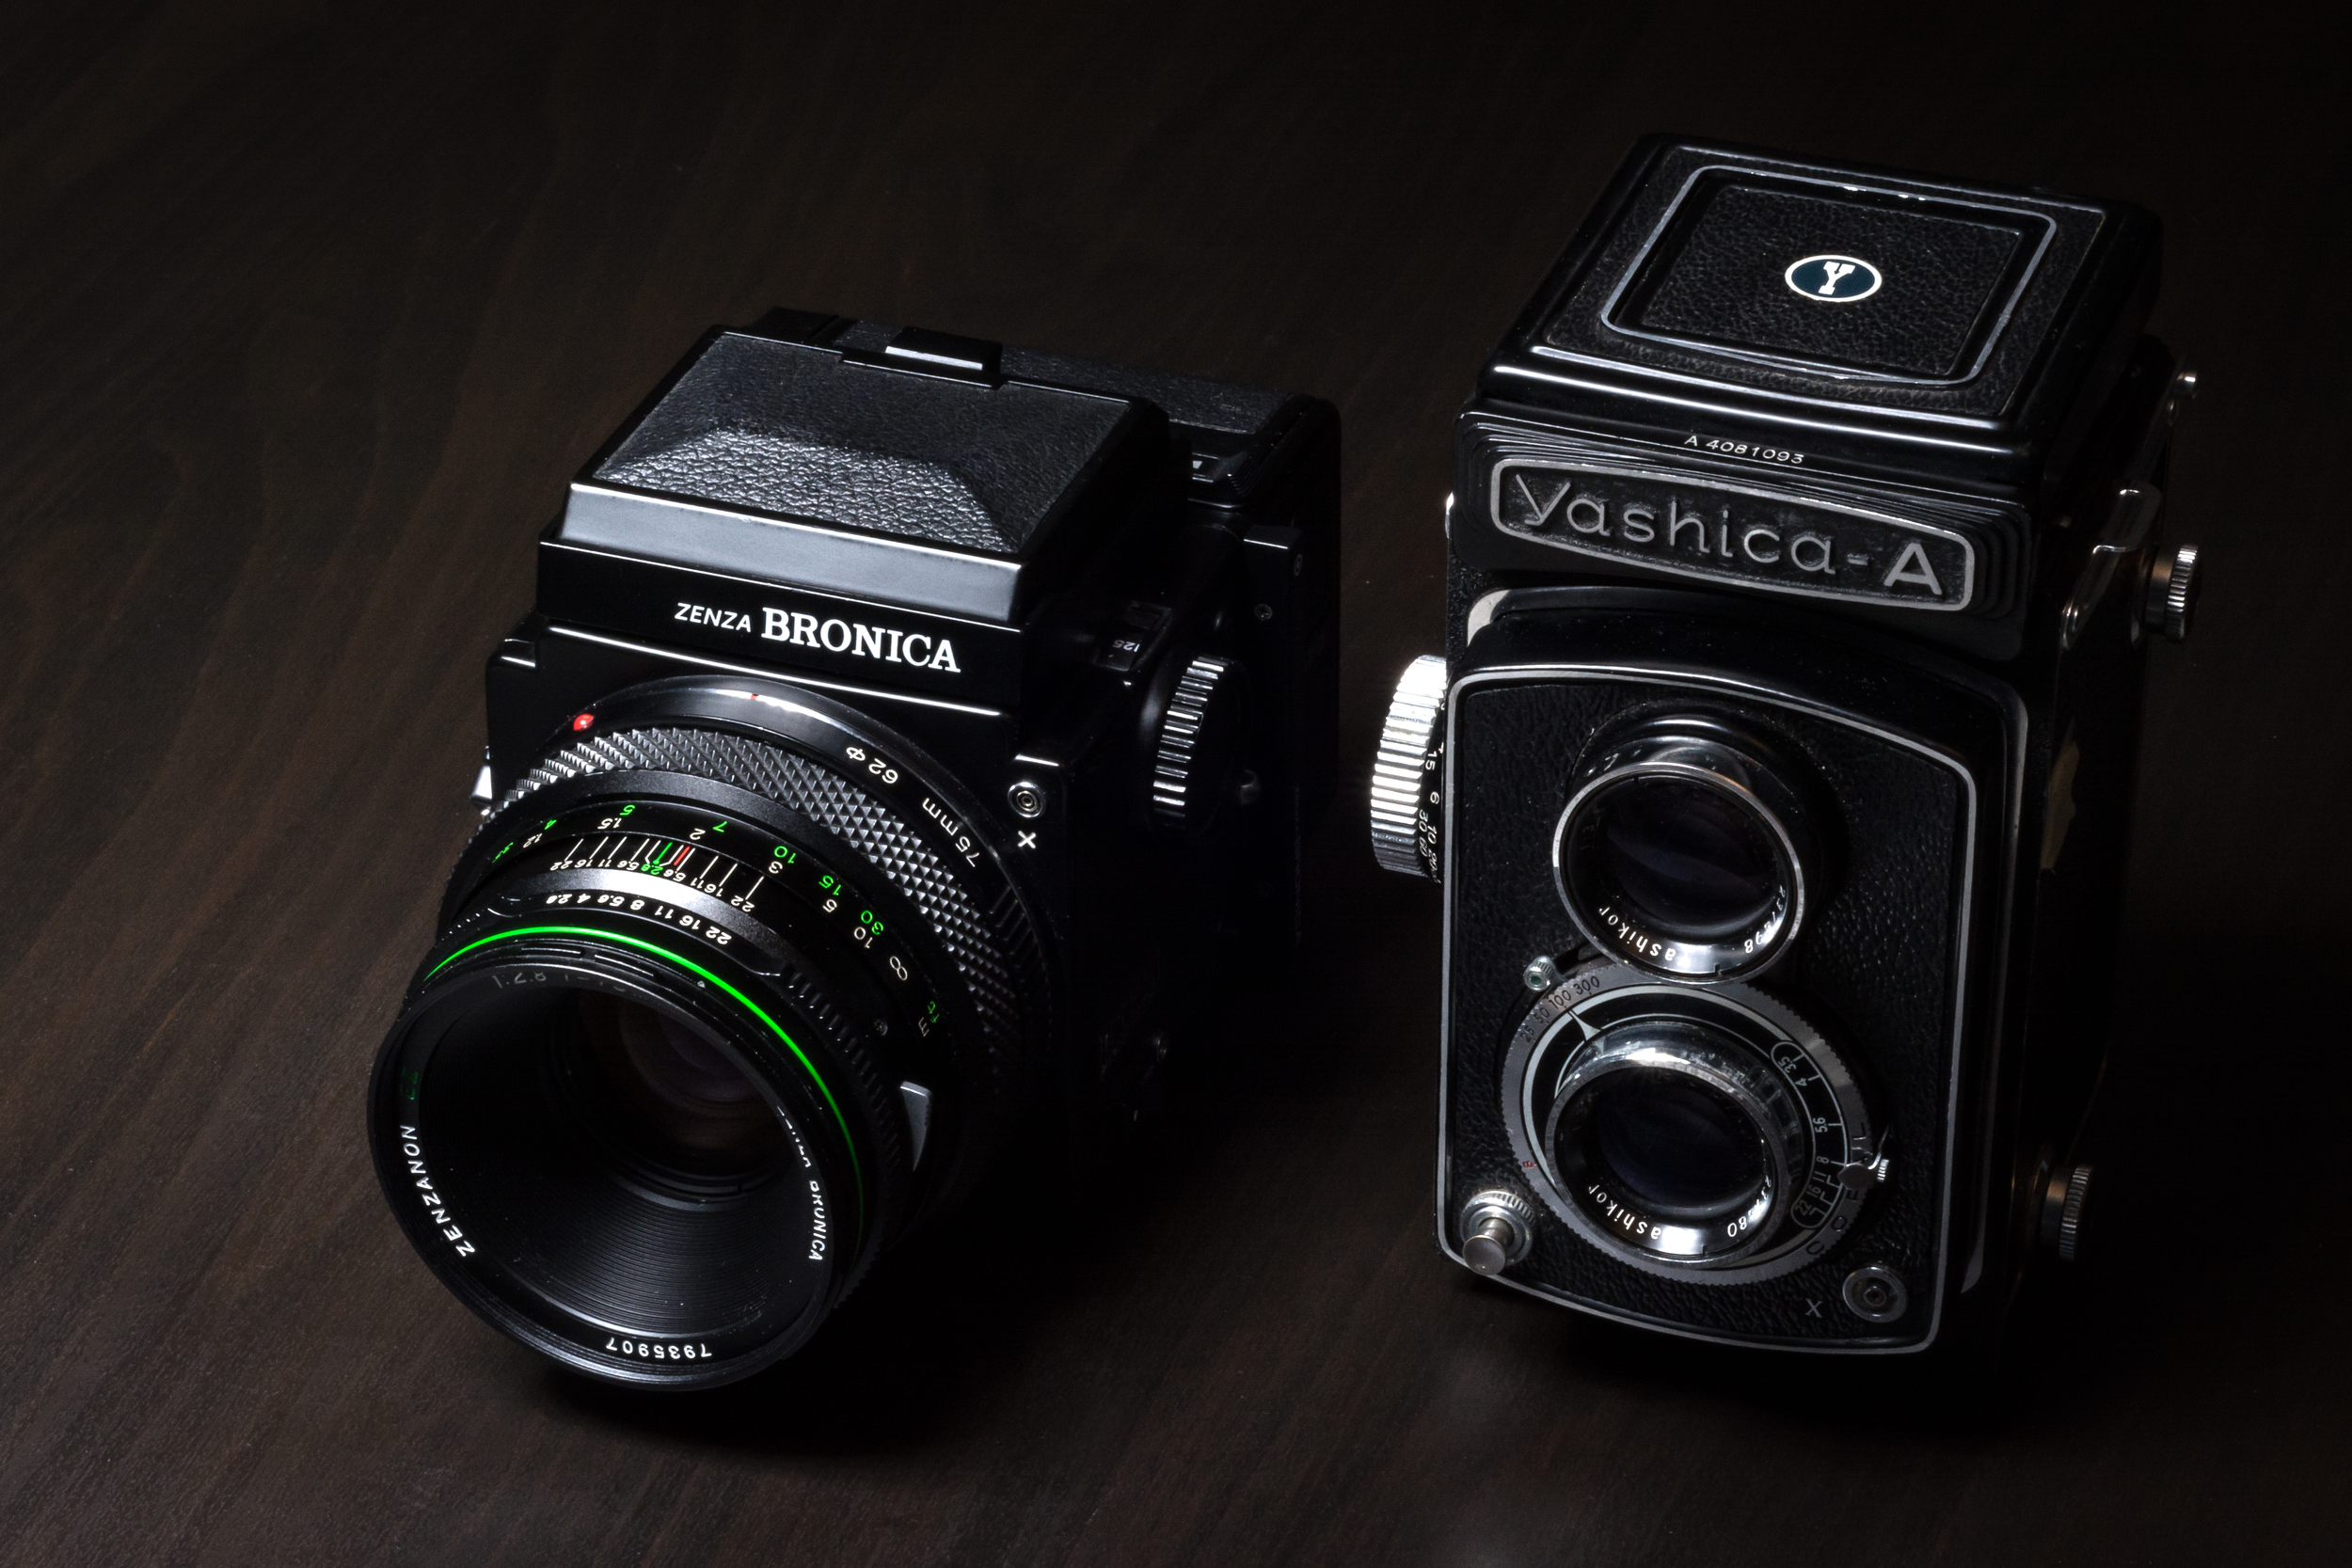 Bronica ETRS & Yashica A